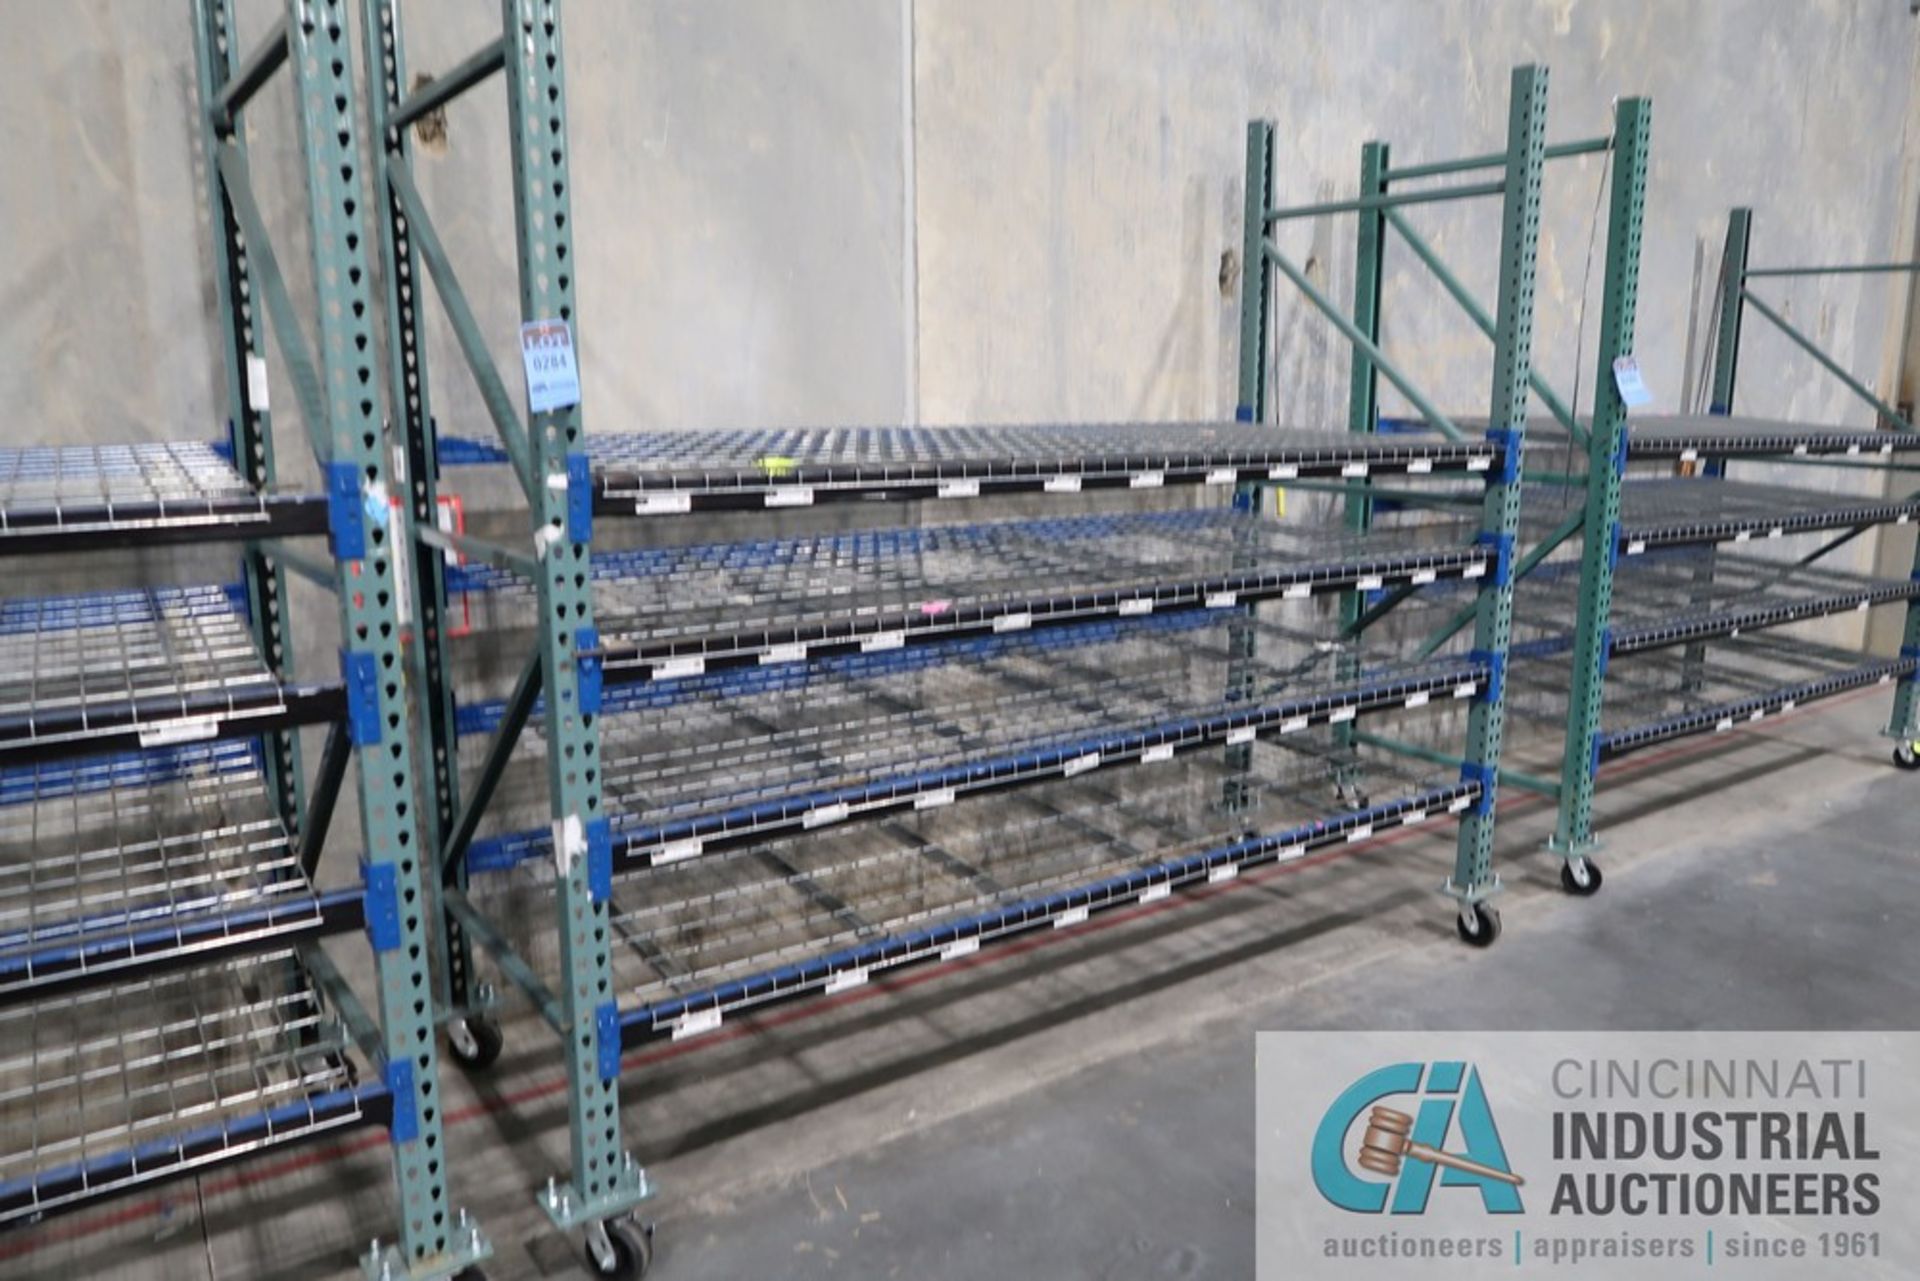 SECTION 108" LONG X 42" WIDE X 96" PORTABLE TEARDROP STYLE PALLET RACK WITH (2) 42" X 96"